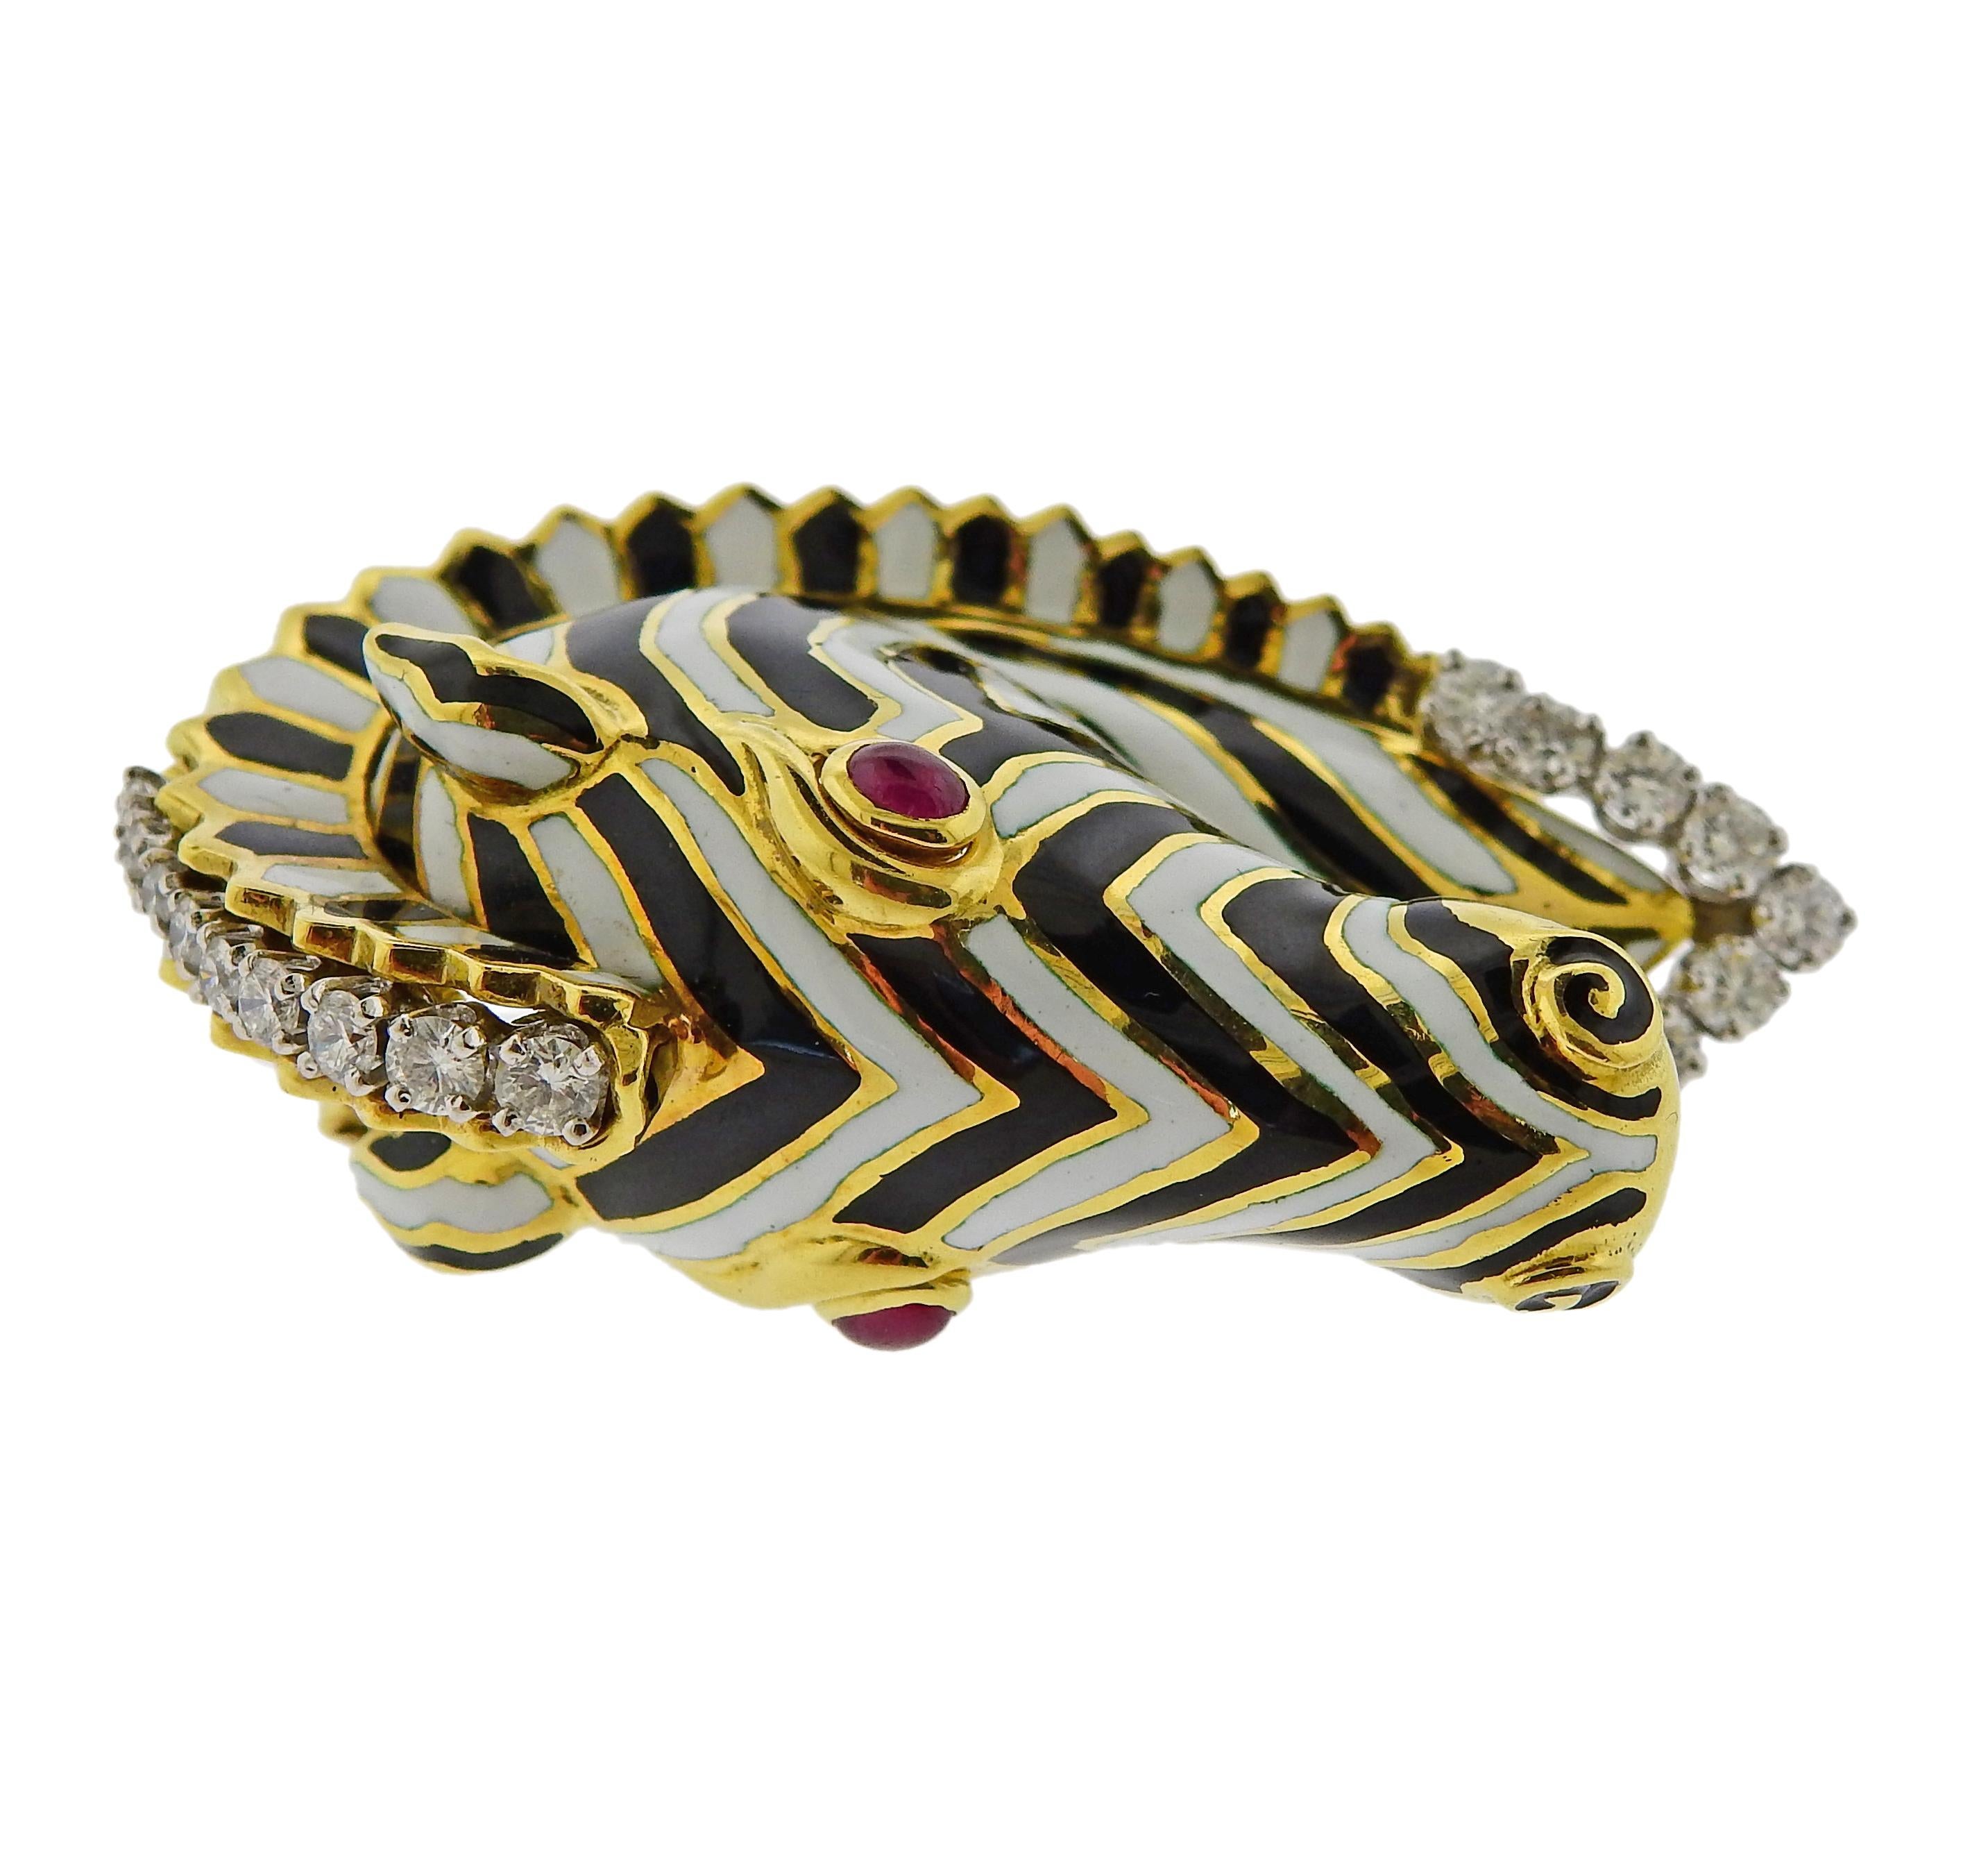 18k gold and platinum zebra brooch by David Webb, set with ruby cabochon eyes and approx. 1.00ctw in diamonds. The brooch measures 52mm x 33mm . marked David Webb, 18k, 900 PT. Weighs 45.7 grams. 

SKU#PB-03023